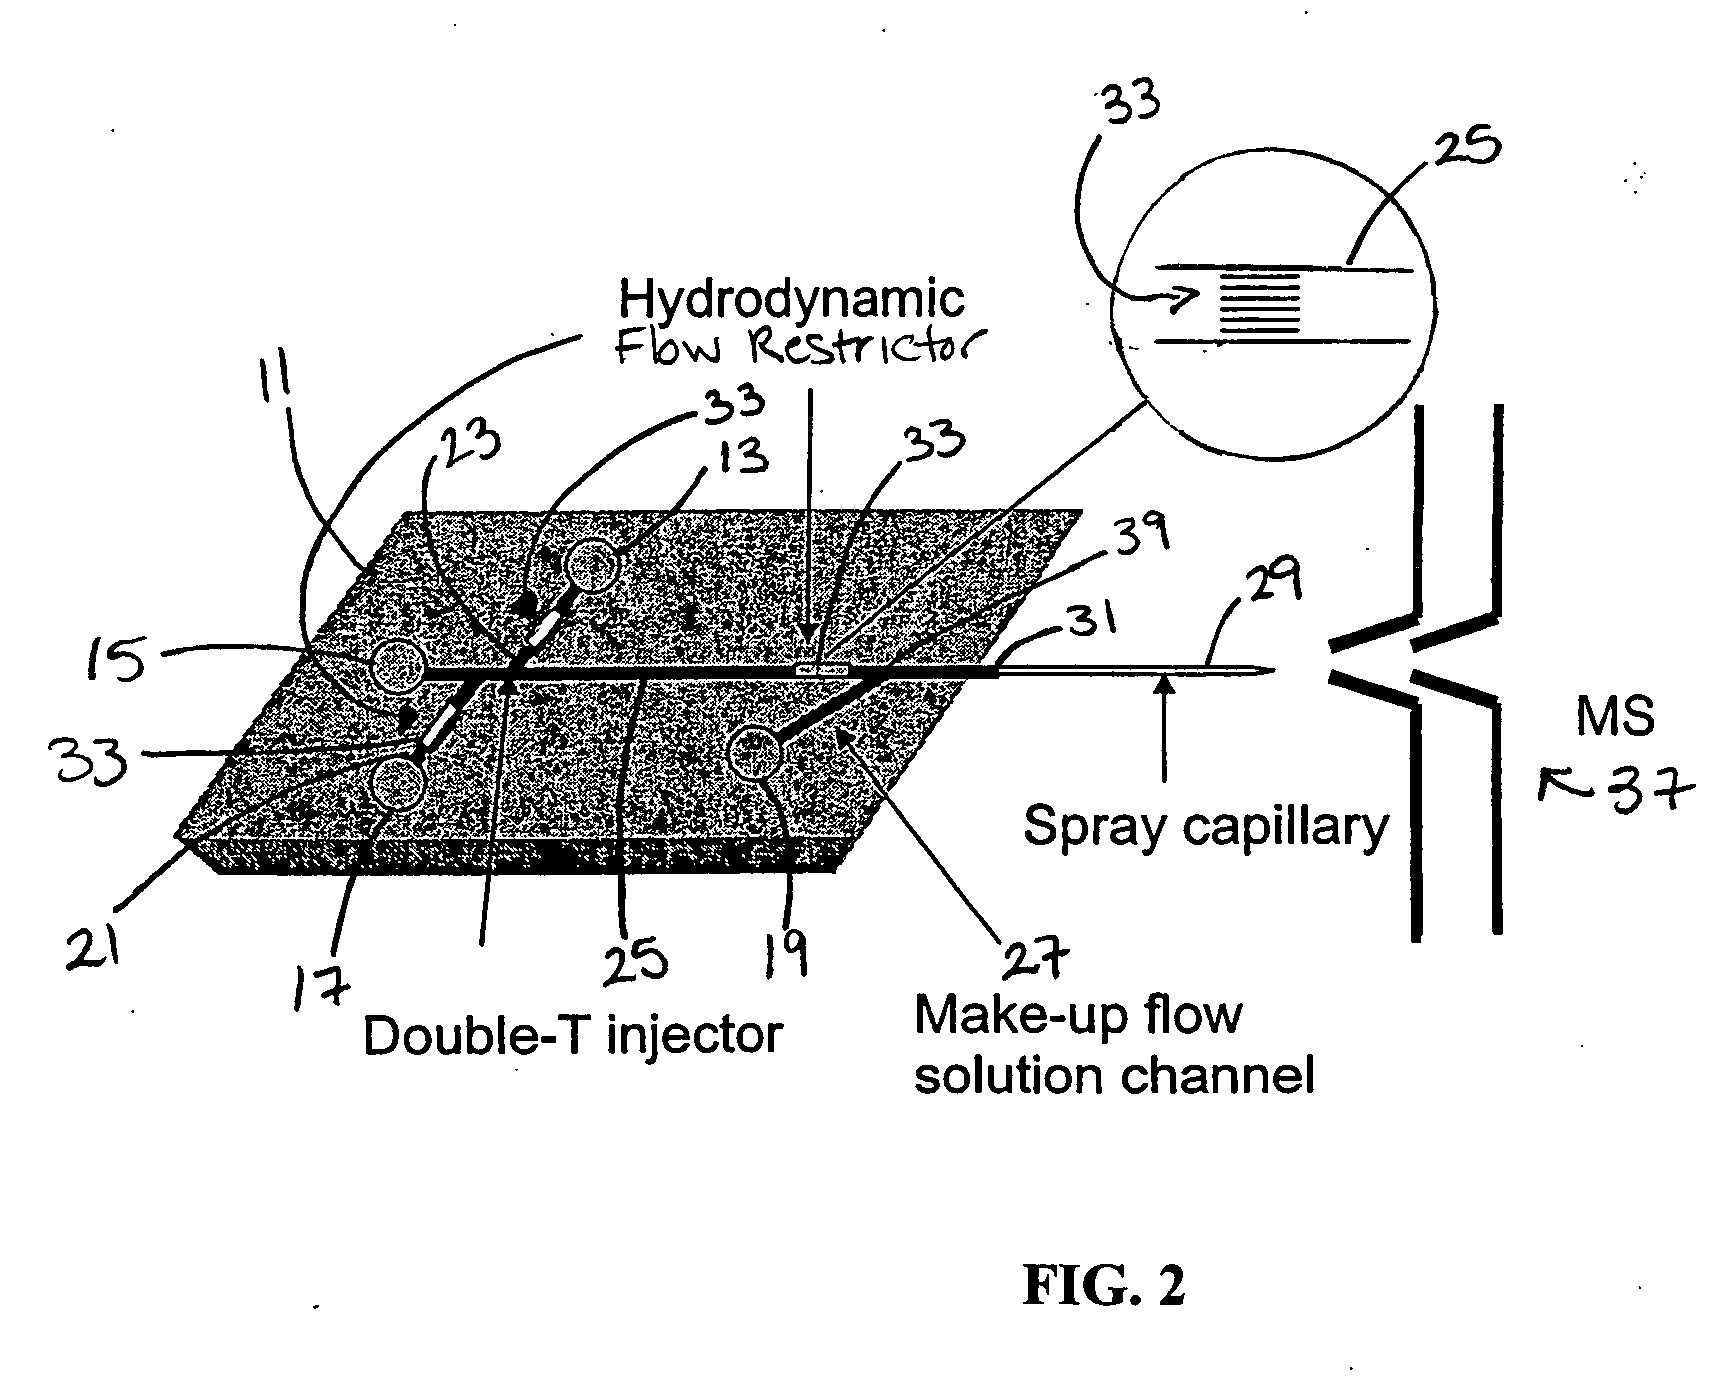 Apparatus and method for coupling microfluidic systems with electrospray ionization mass spectrometry utilizing a hydrodynamic flow restrictor